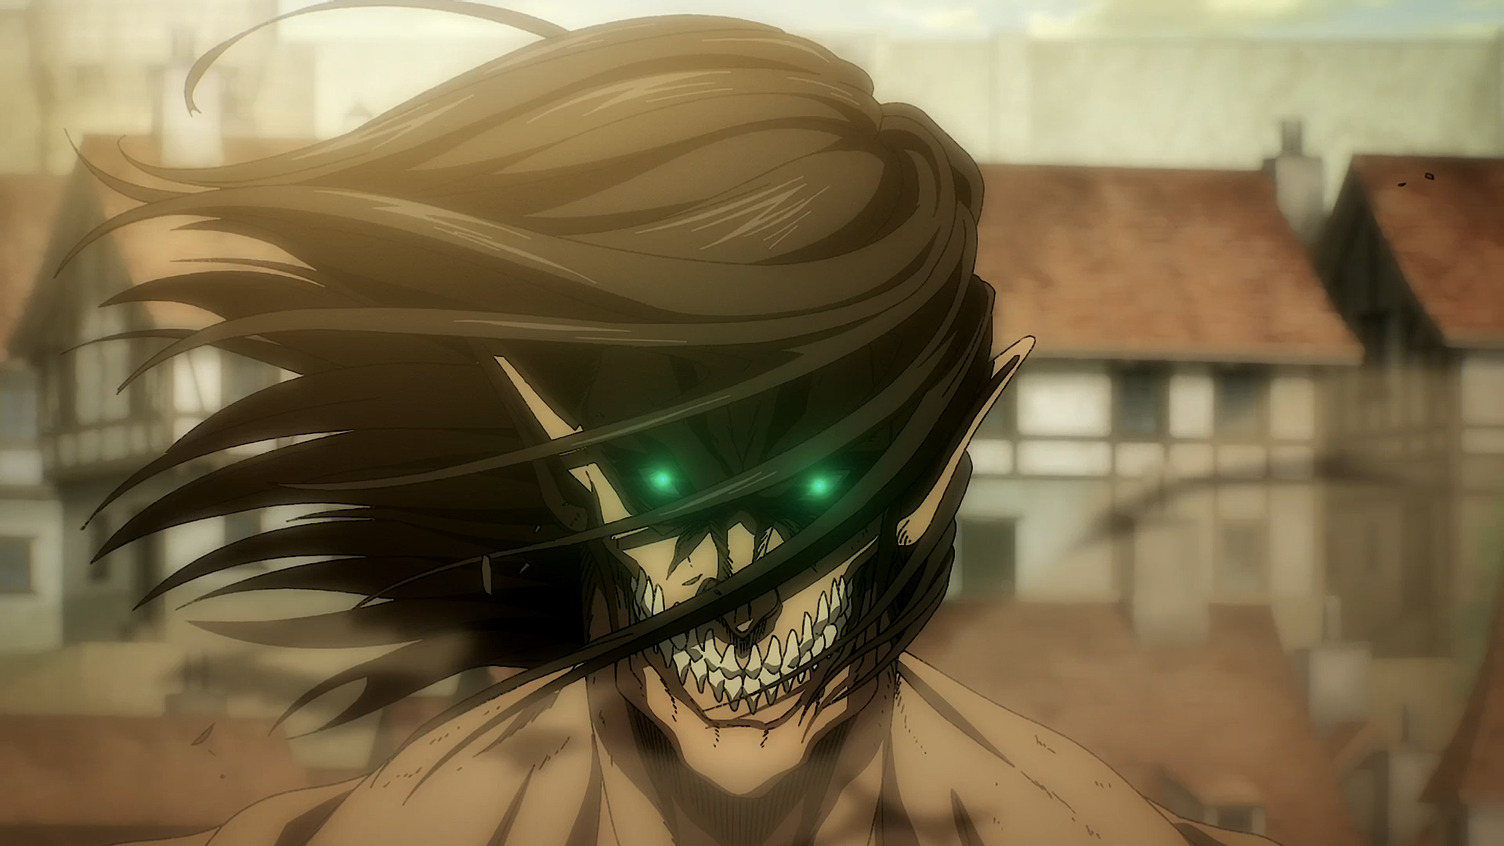 Unraveling the End: Is "Attack on Titan" Anime Truly Over?